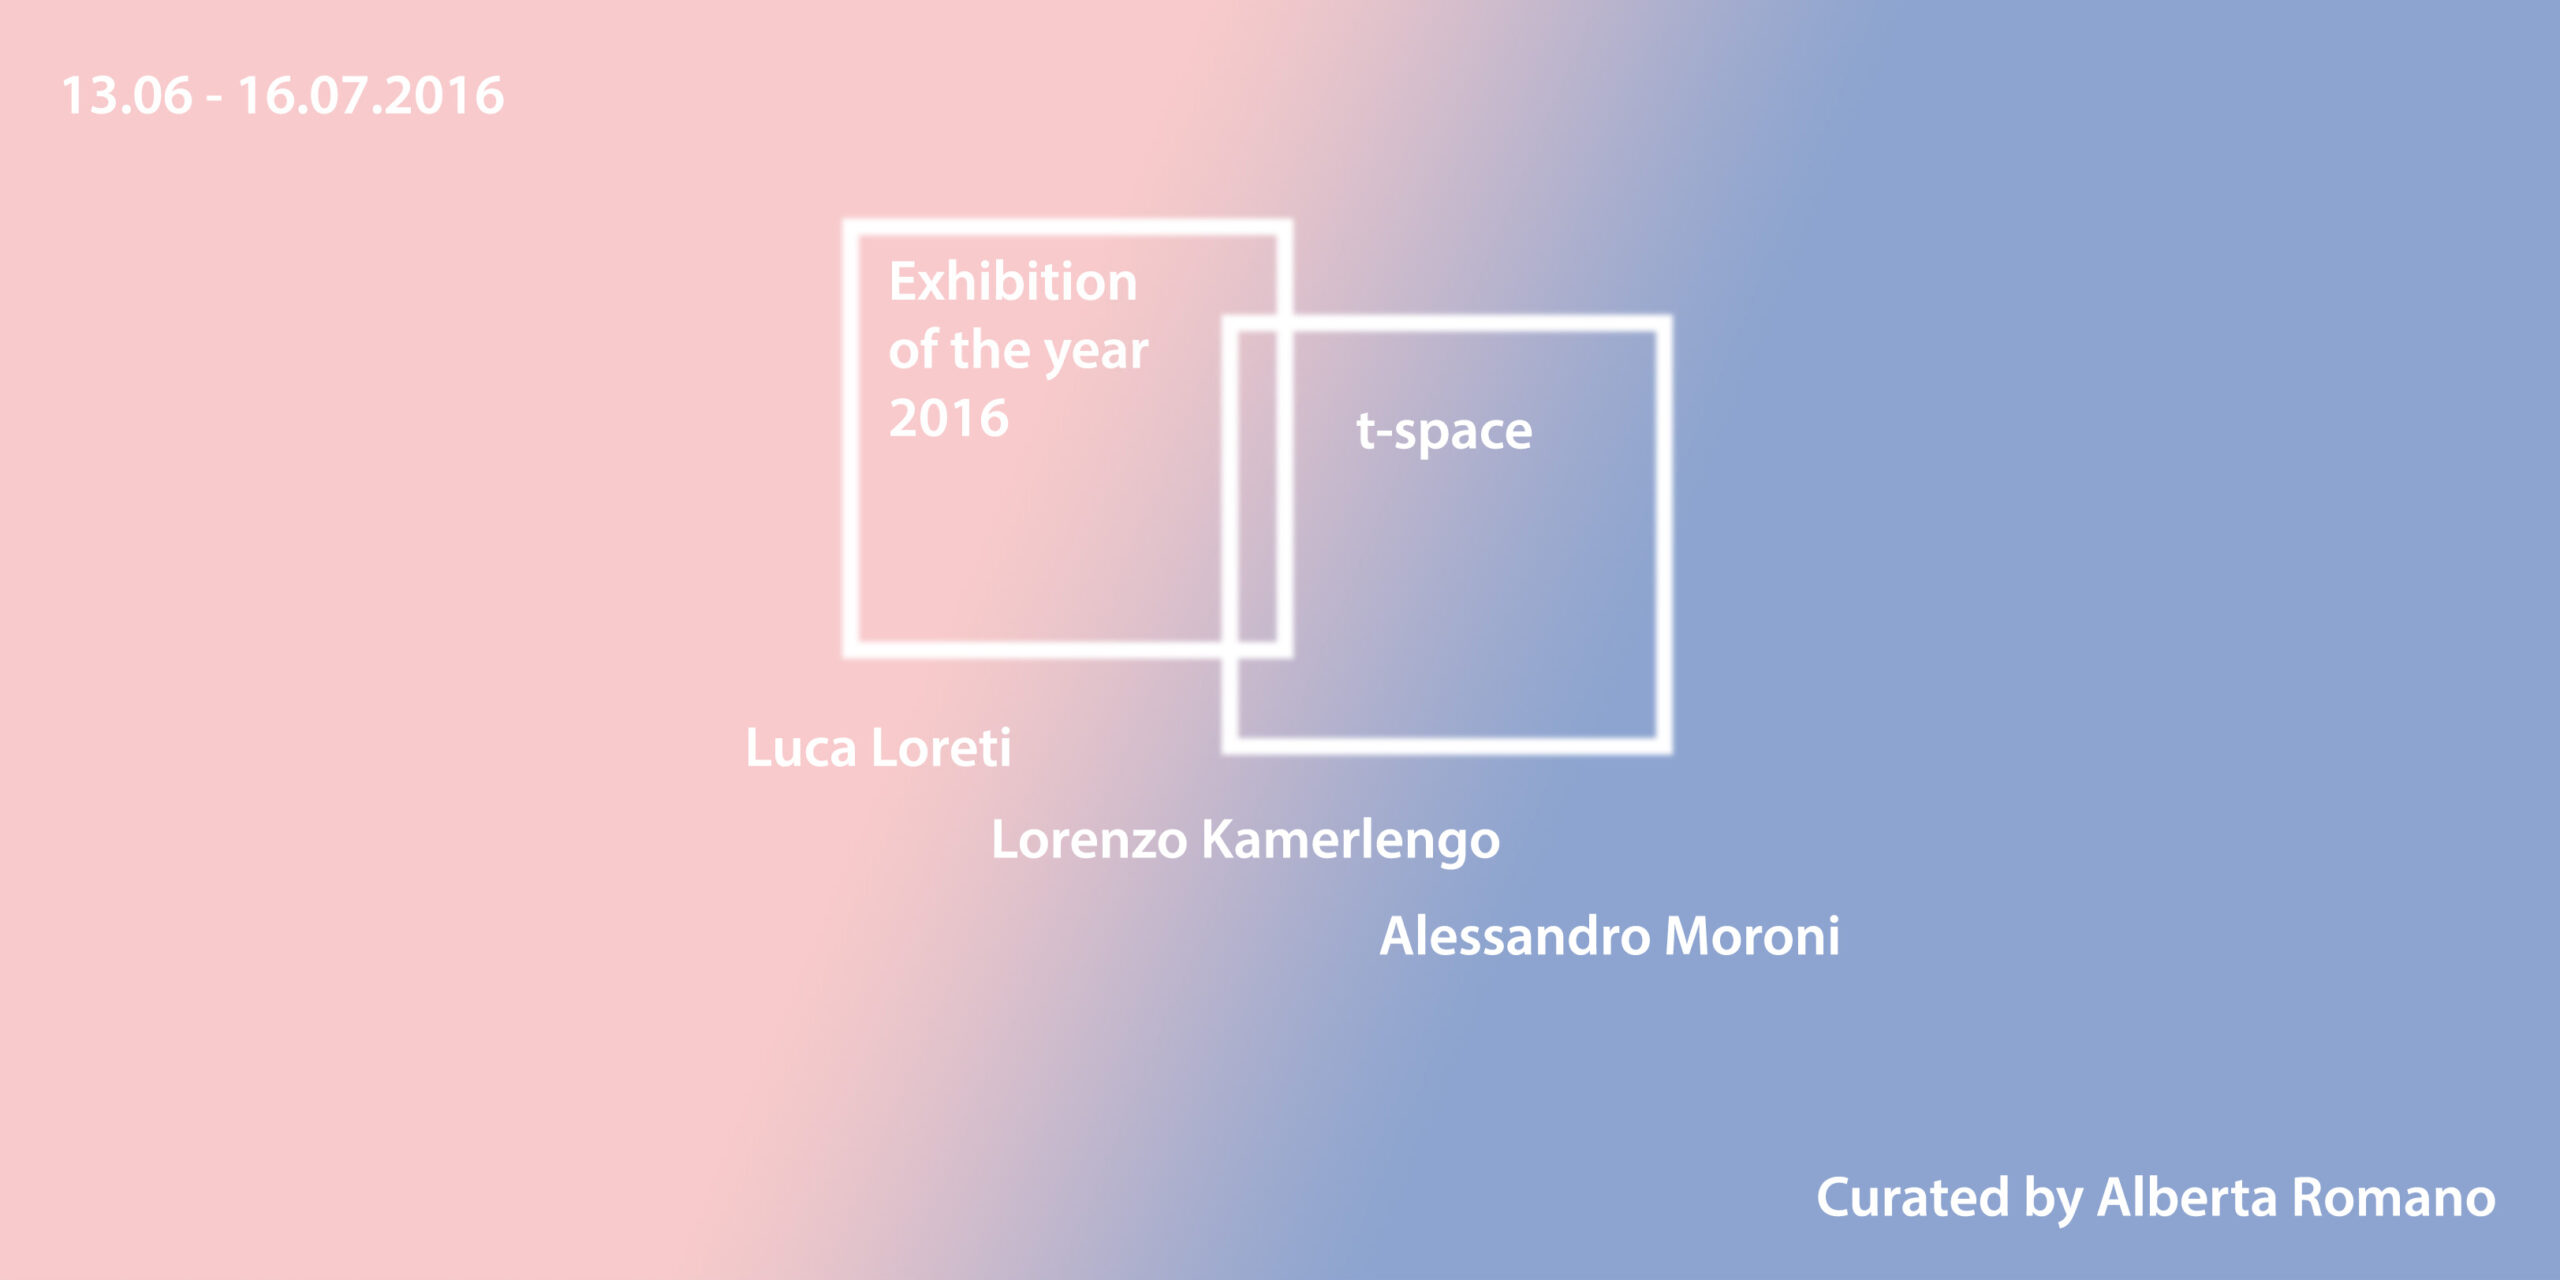 Exhibition of the year 2016